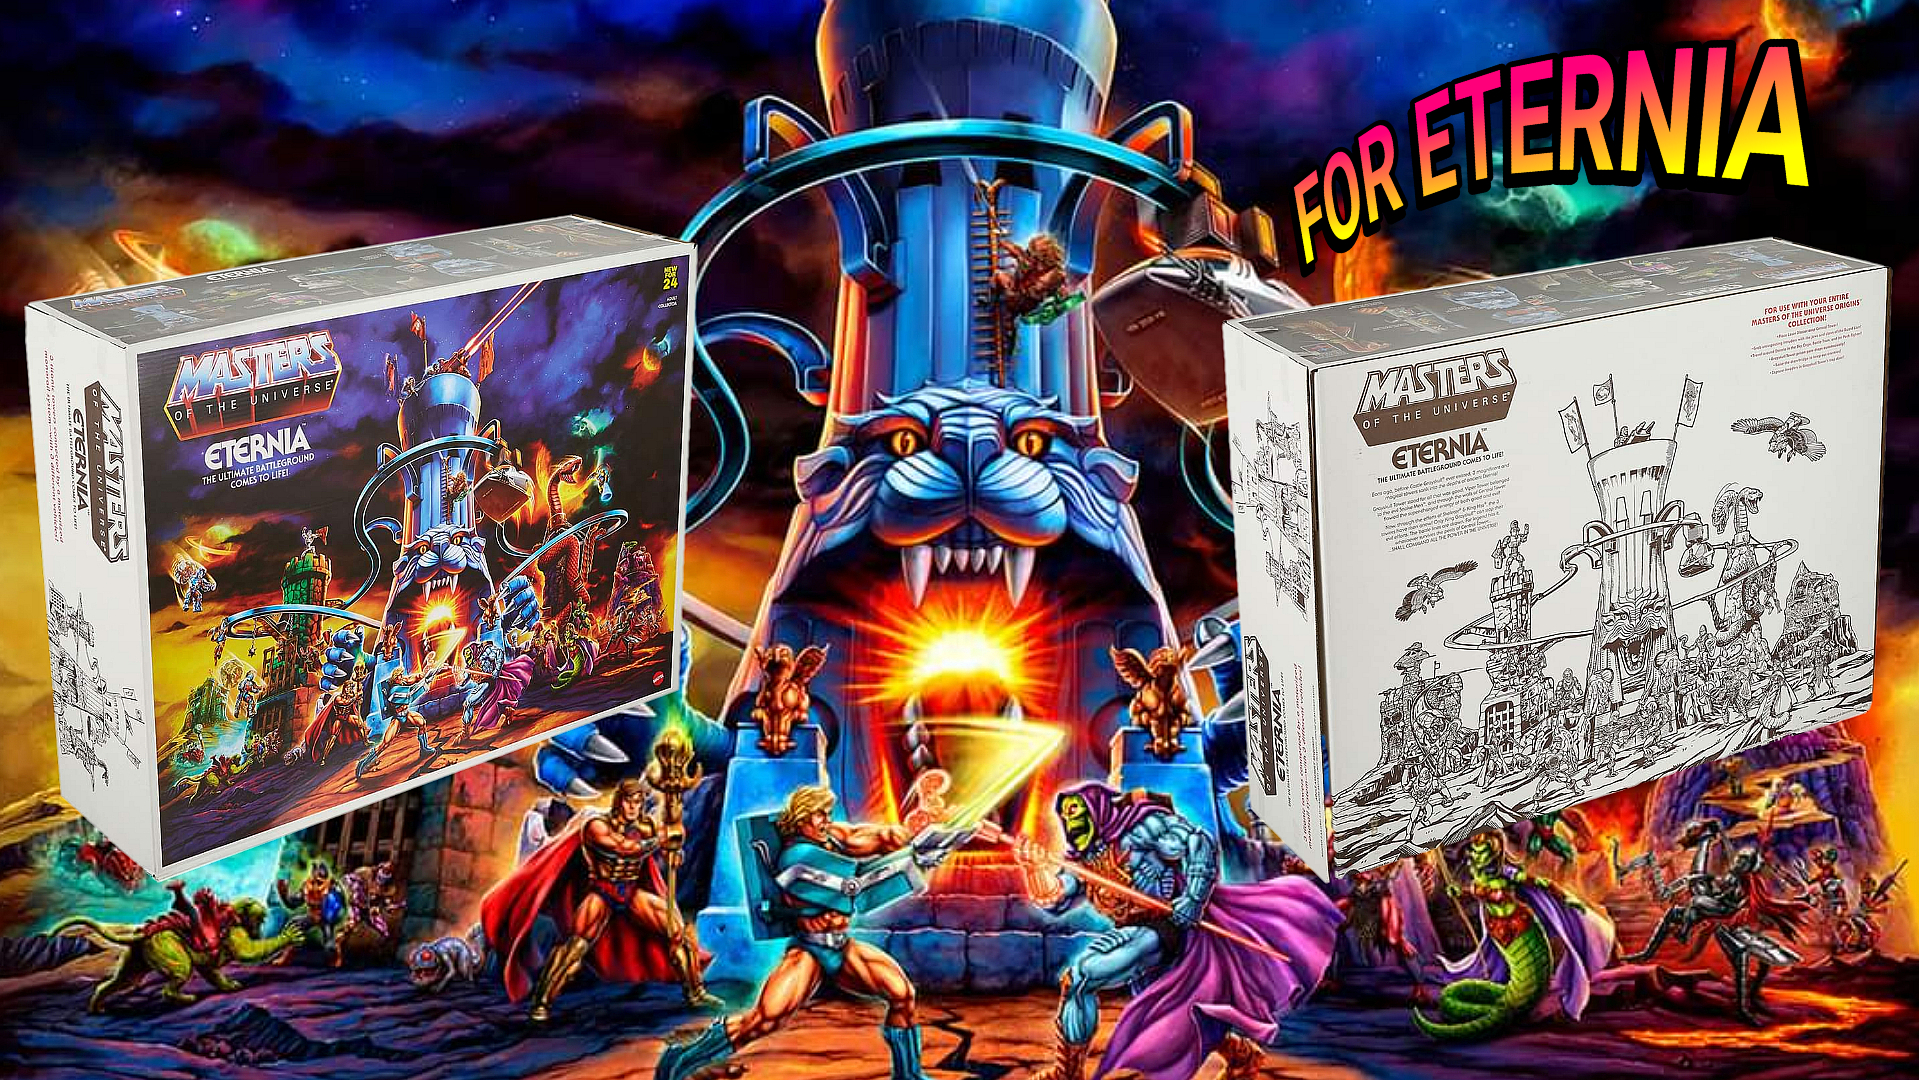 Mattel releases official images of the Eternia Playset Packaging and included Poster